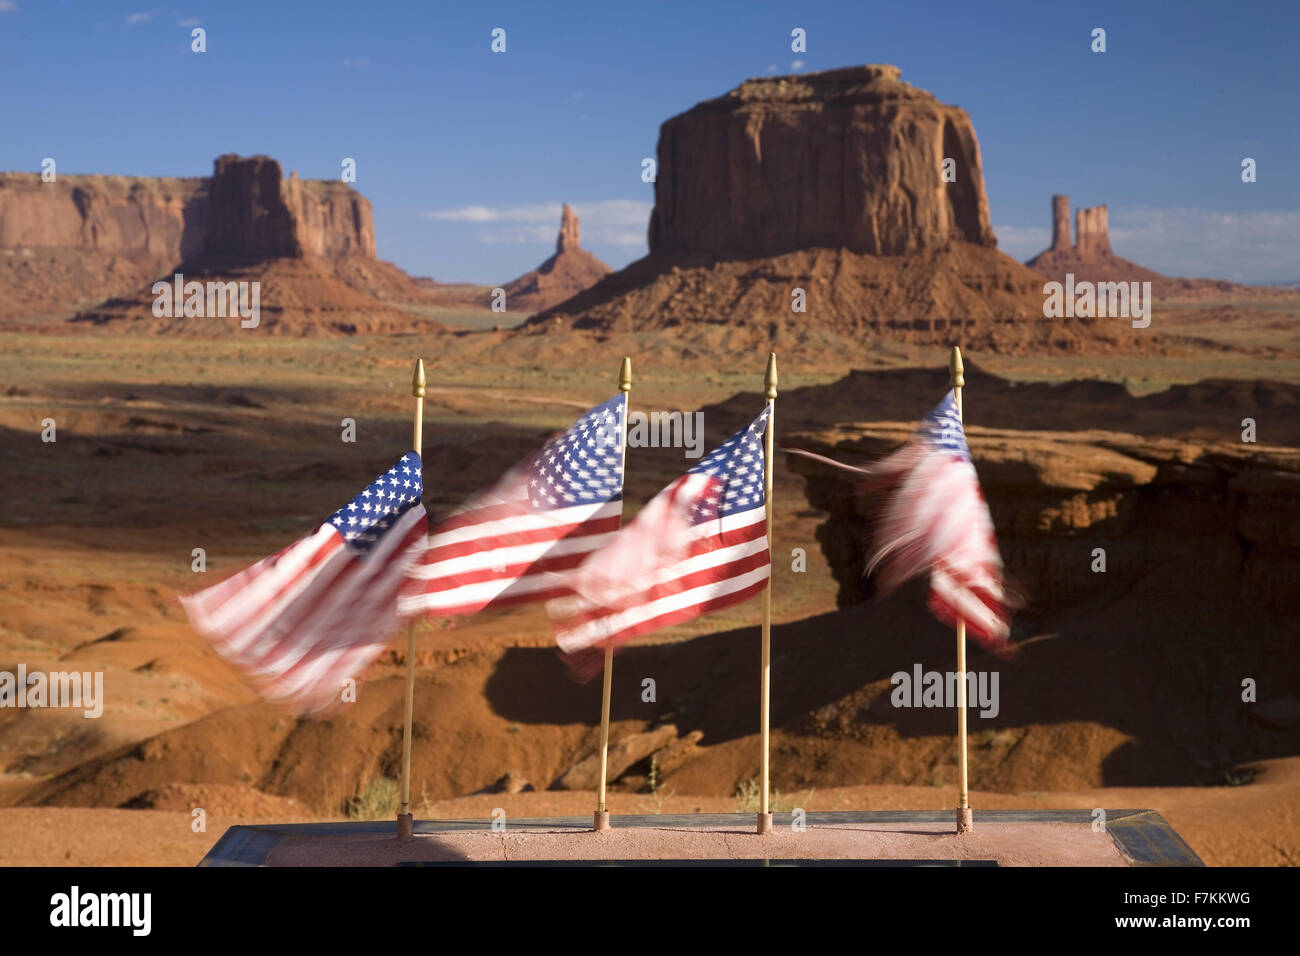 US Flags blowing in wind in front of red buttes and colorful spires of Monument Valley Navajo Tribal Park, Southern Utah near Arizona border Stock Photo